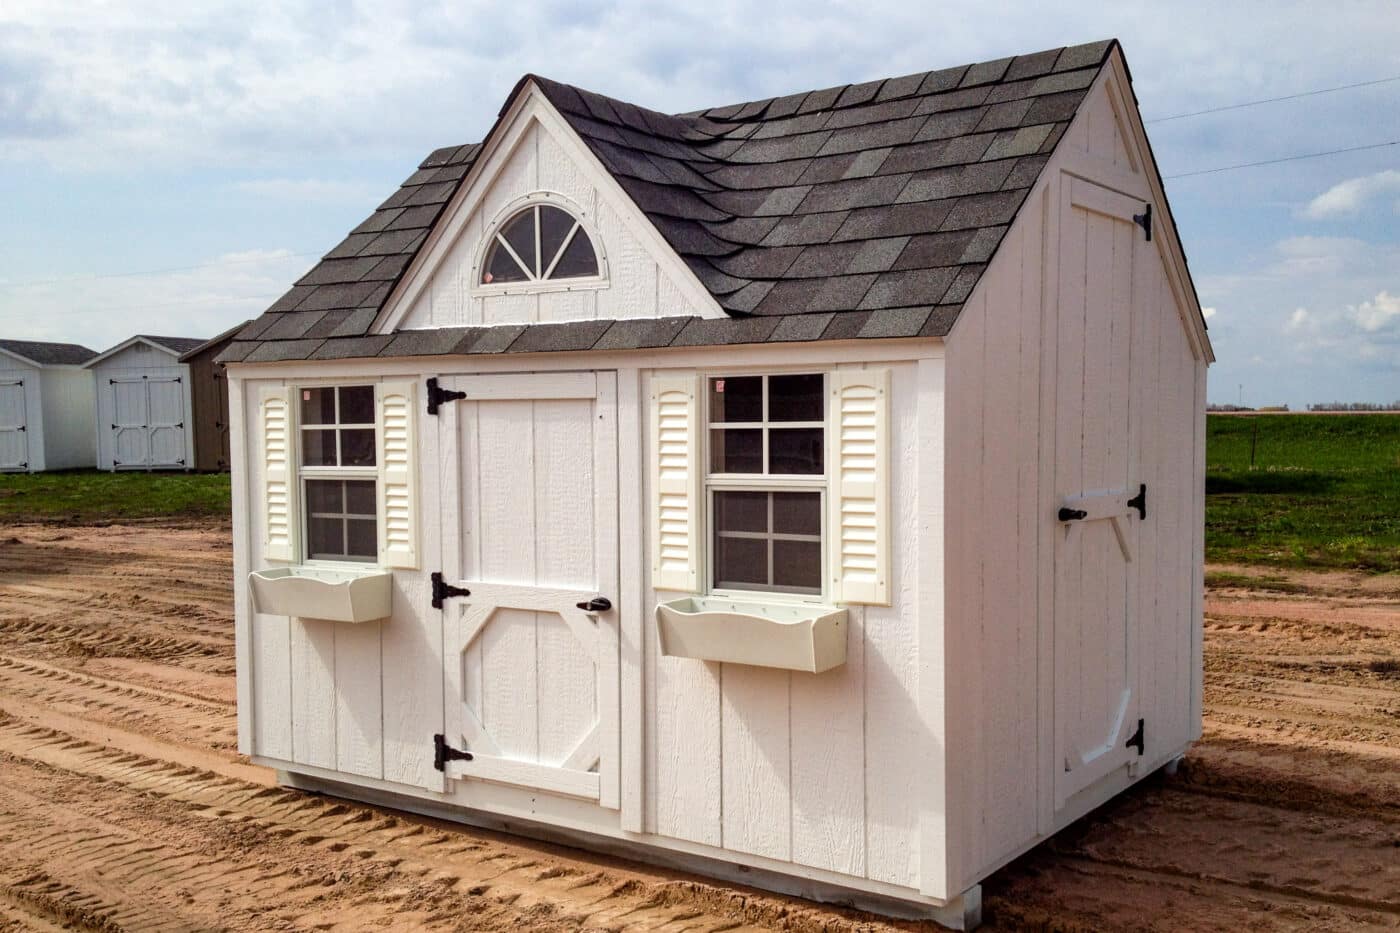 Custom storage shed in shed lot